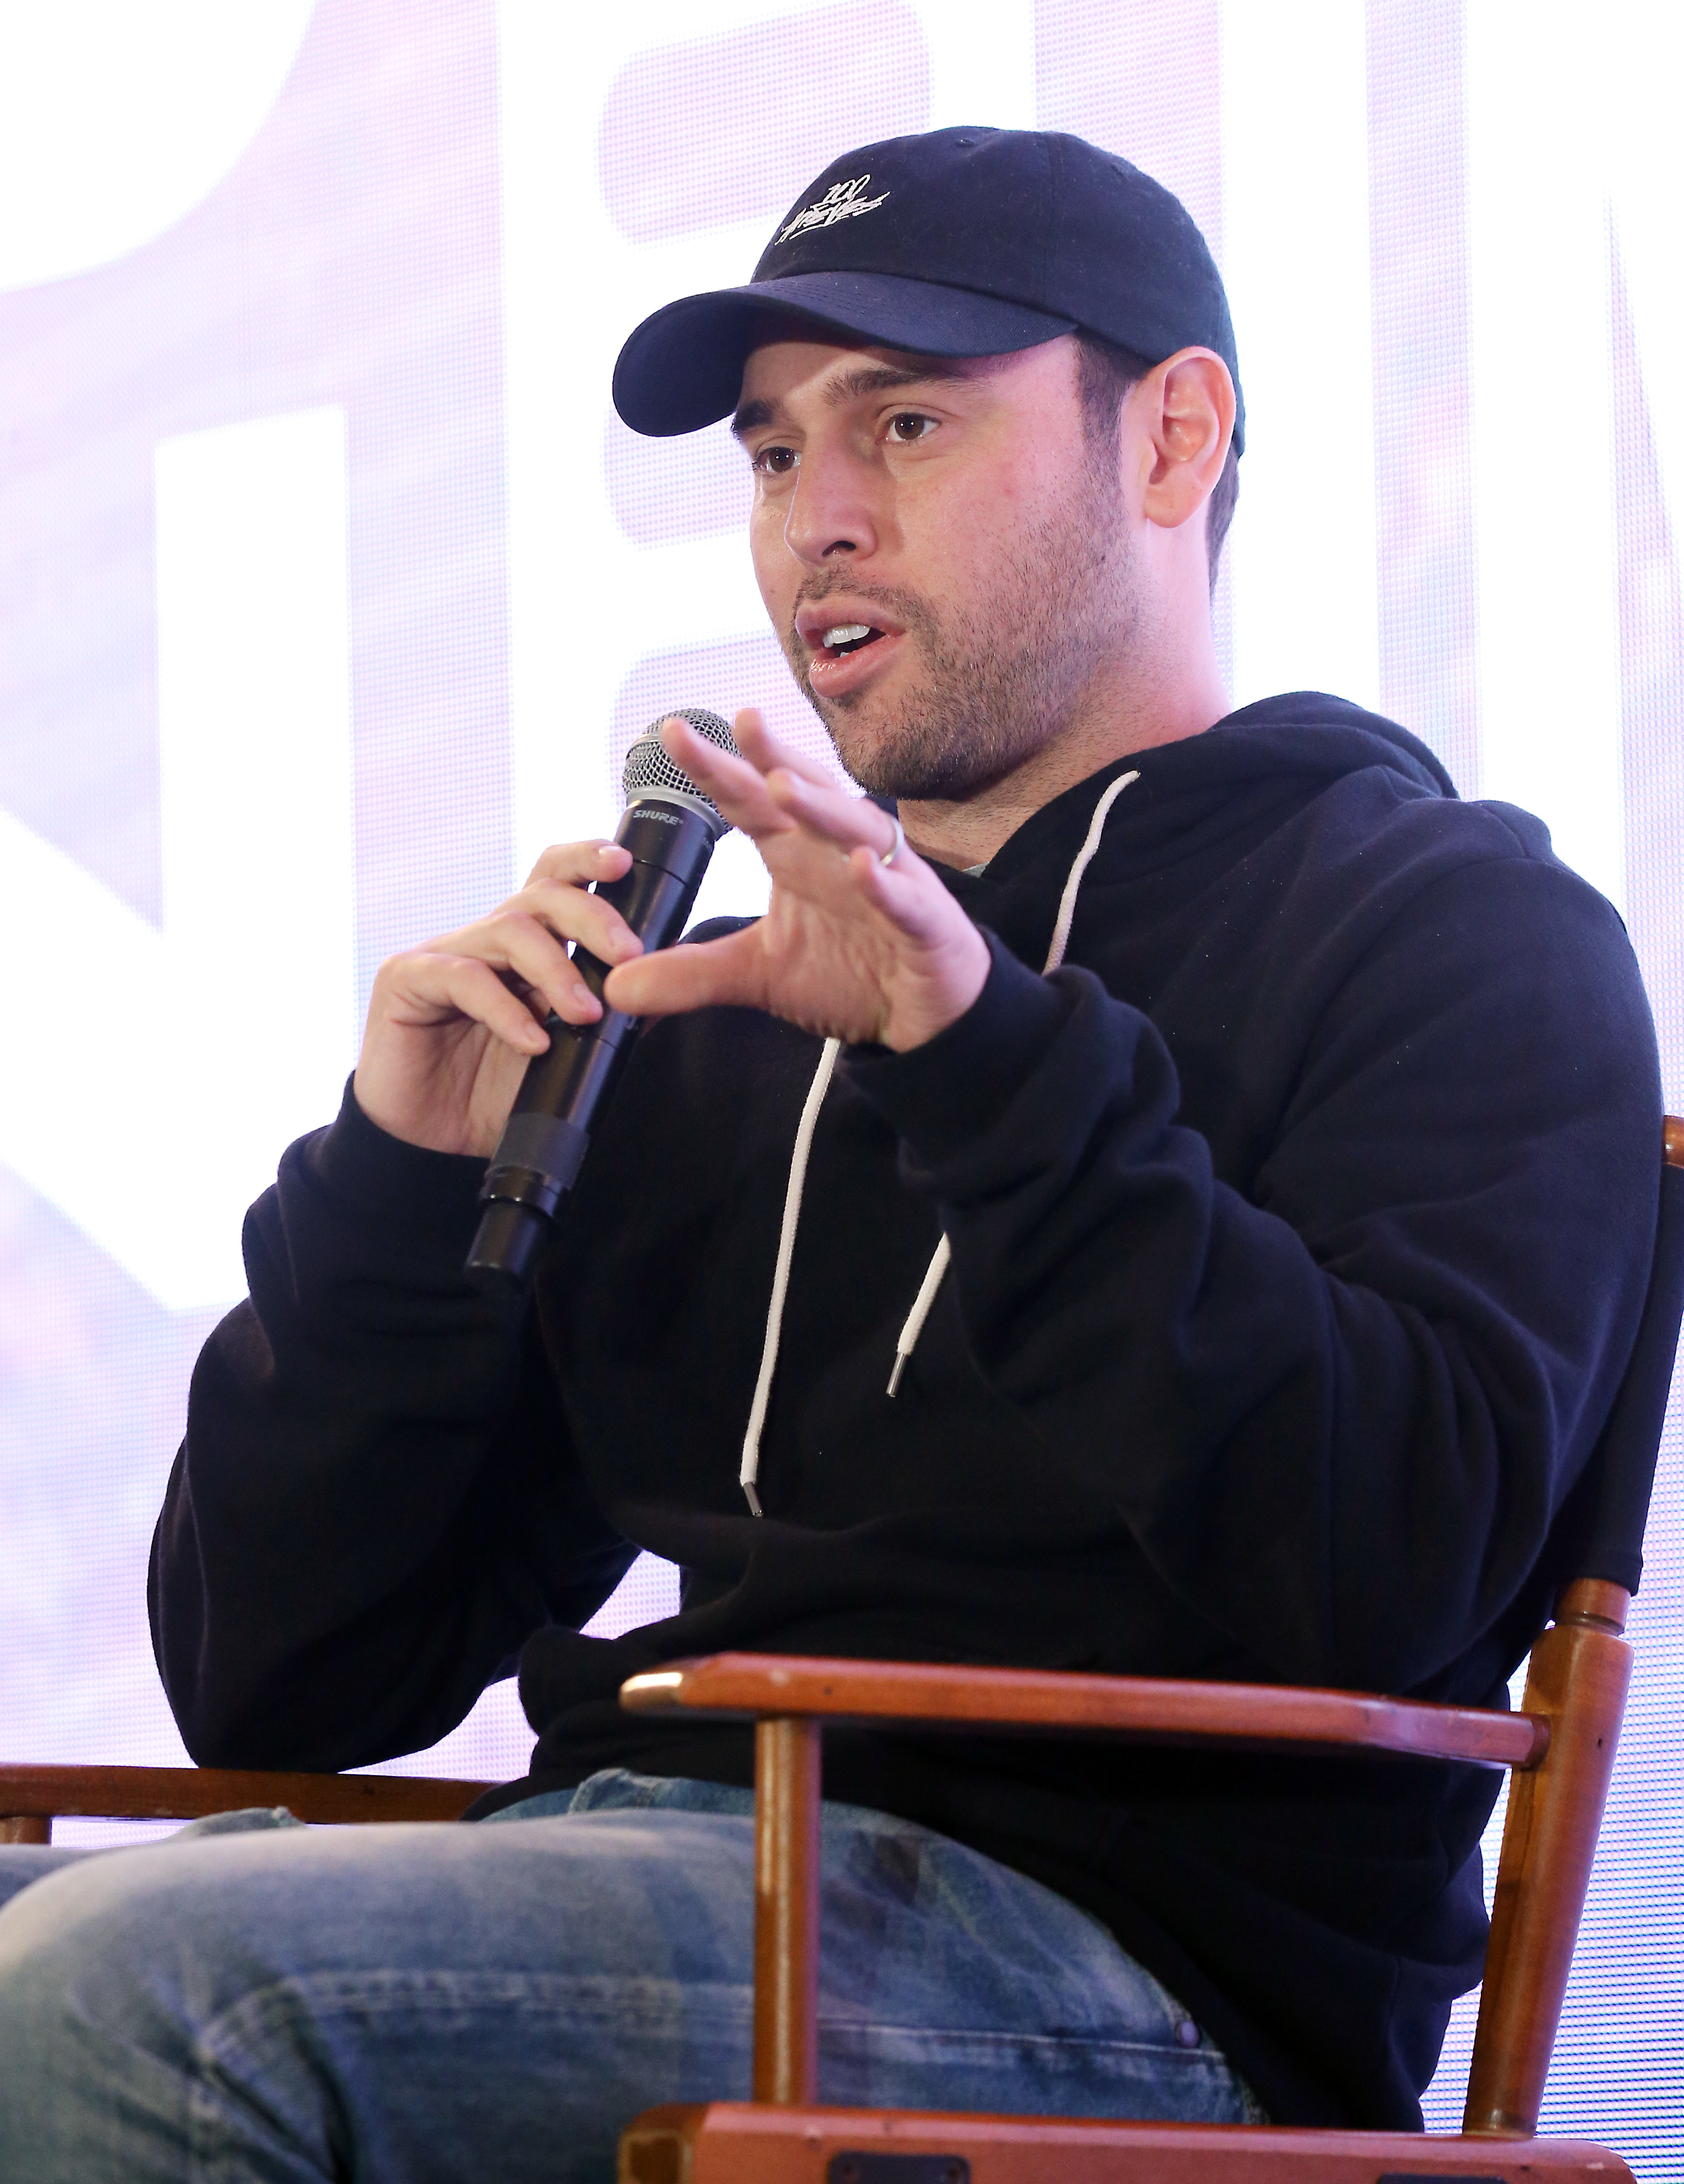 Close-up of Scooter sitting onstage with a microphone and wearing a cap, hoodie, and jeans